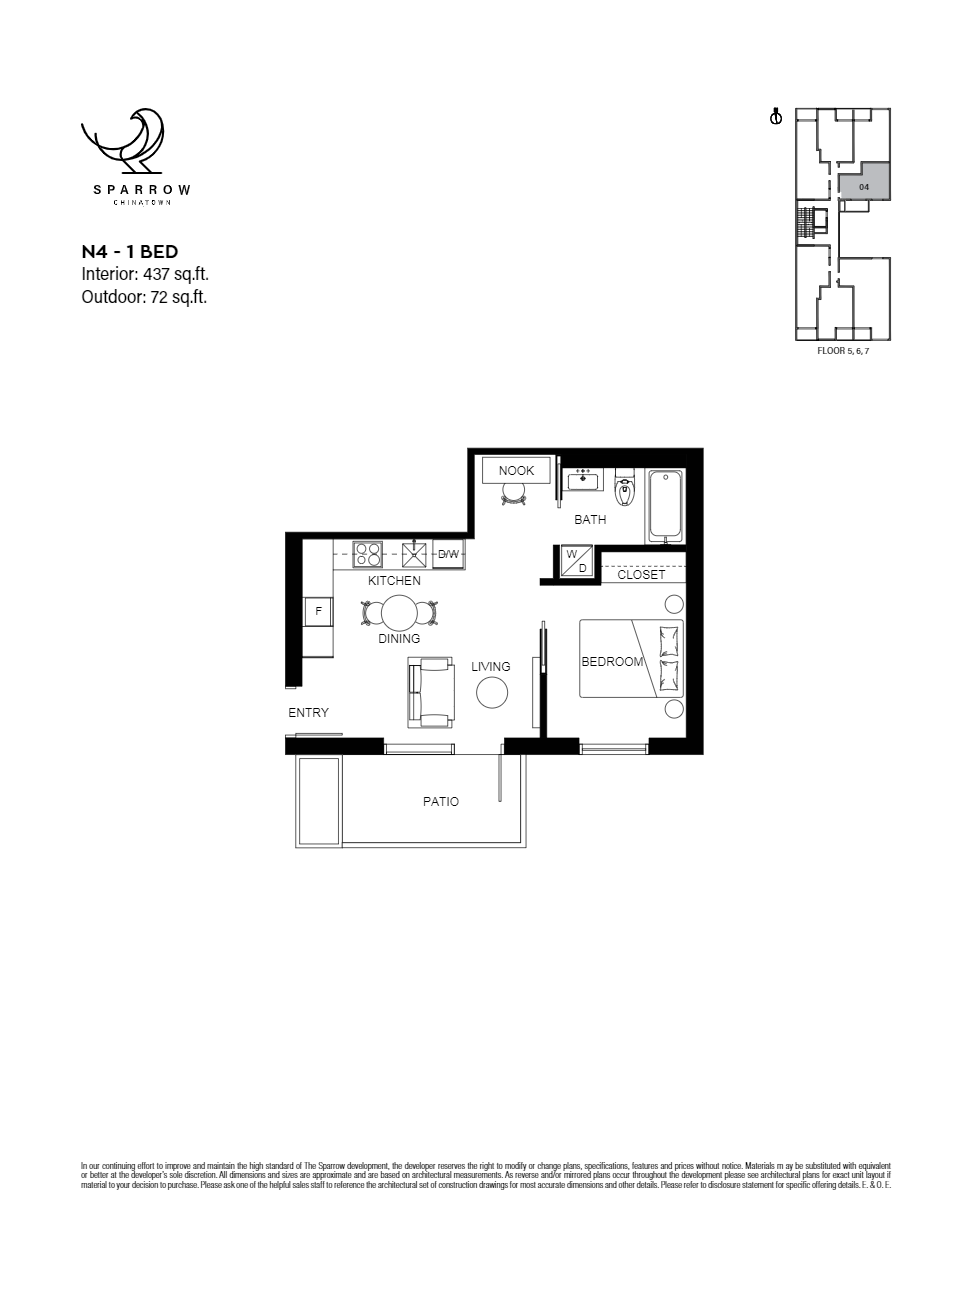 N4 Floor Plan of Sparrow Condos with undefined beds